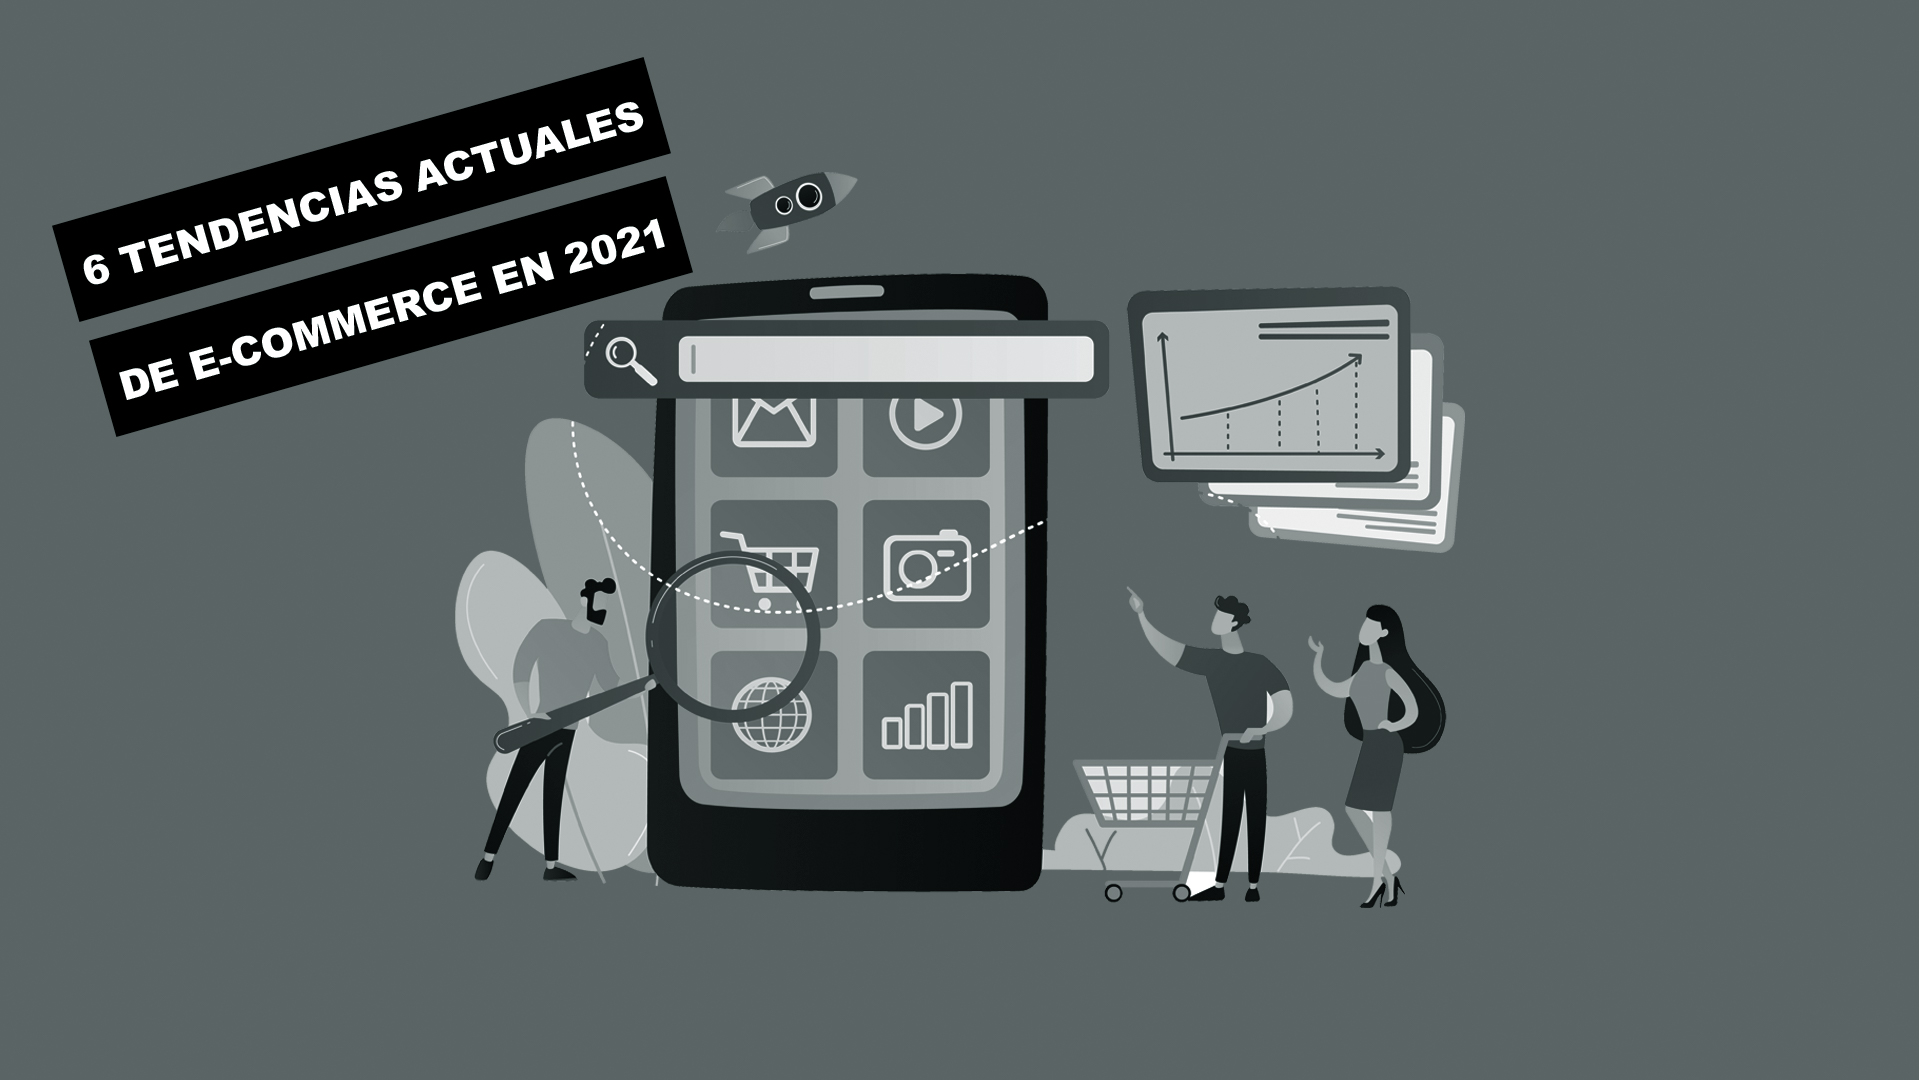 6 e-commerce trends in 2021